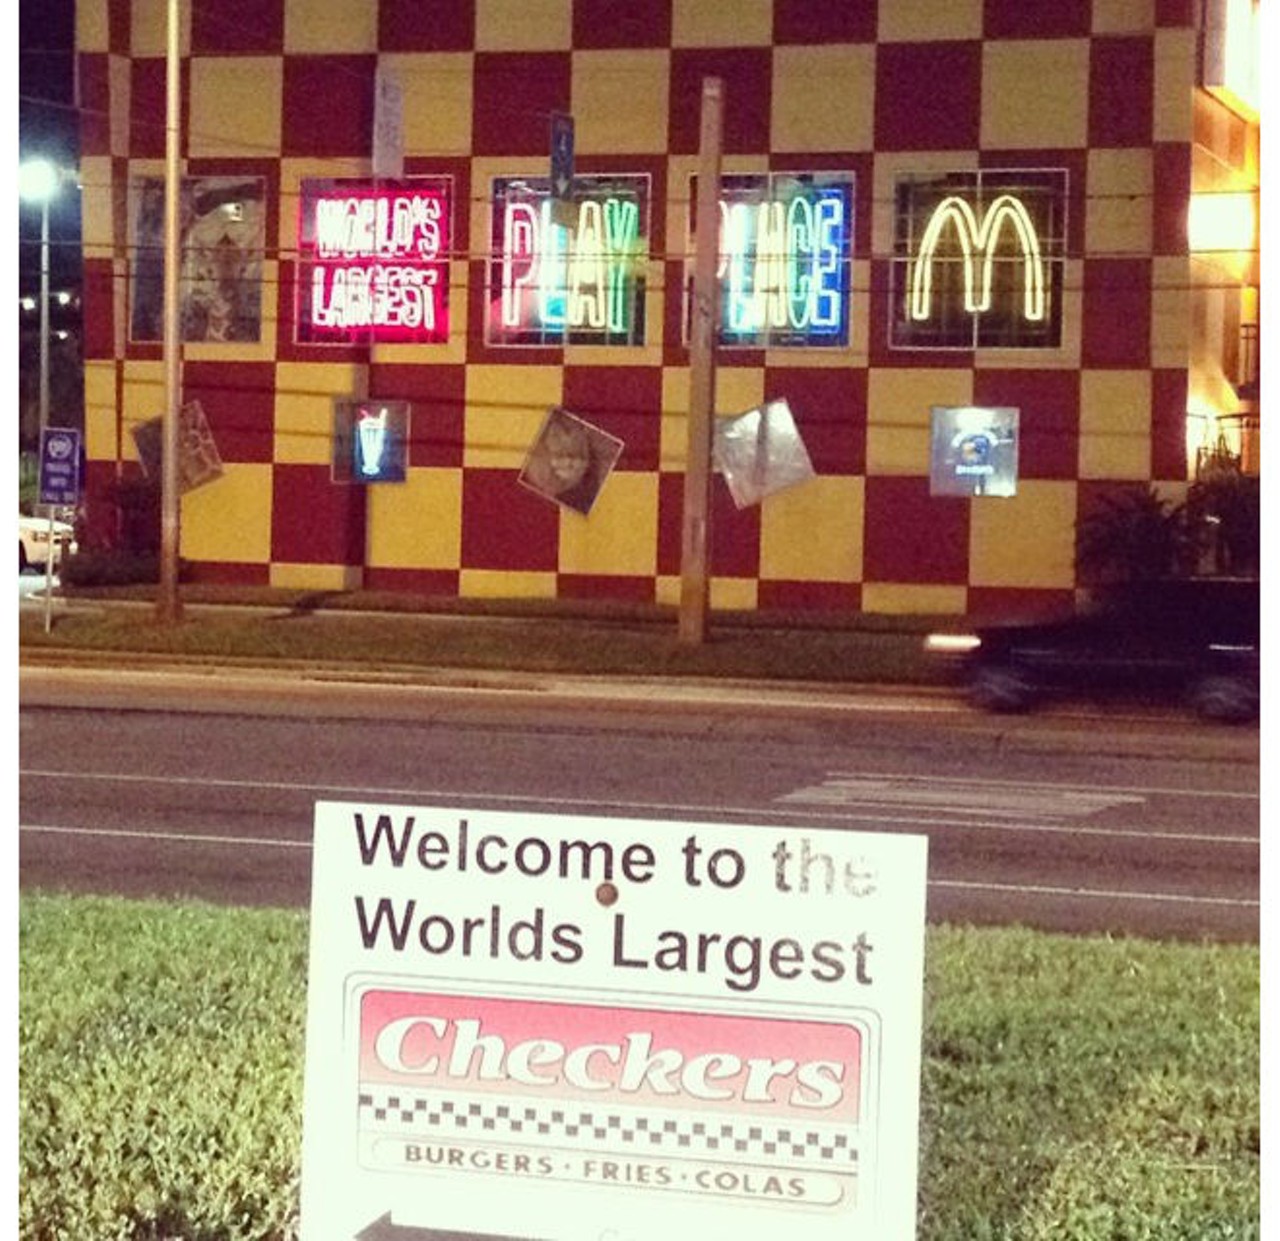 #onlyinorlando will you find the world's largest Checkers across the road from the world's largest McDonald's.Instagram: turntable26